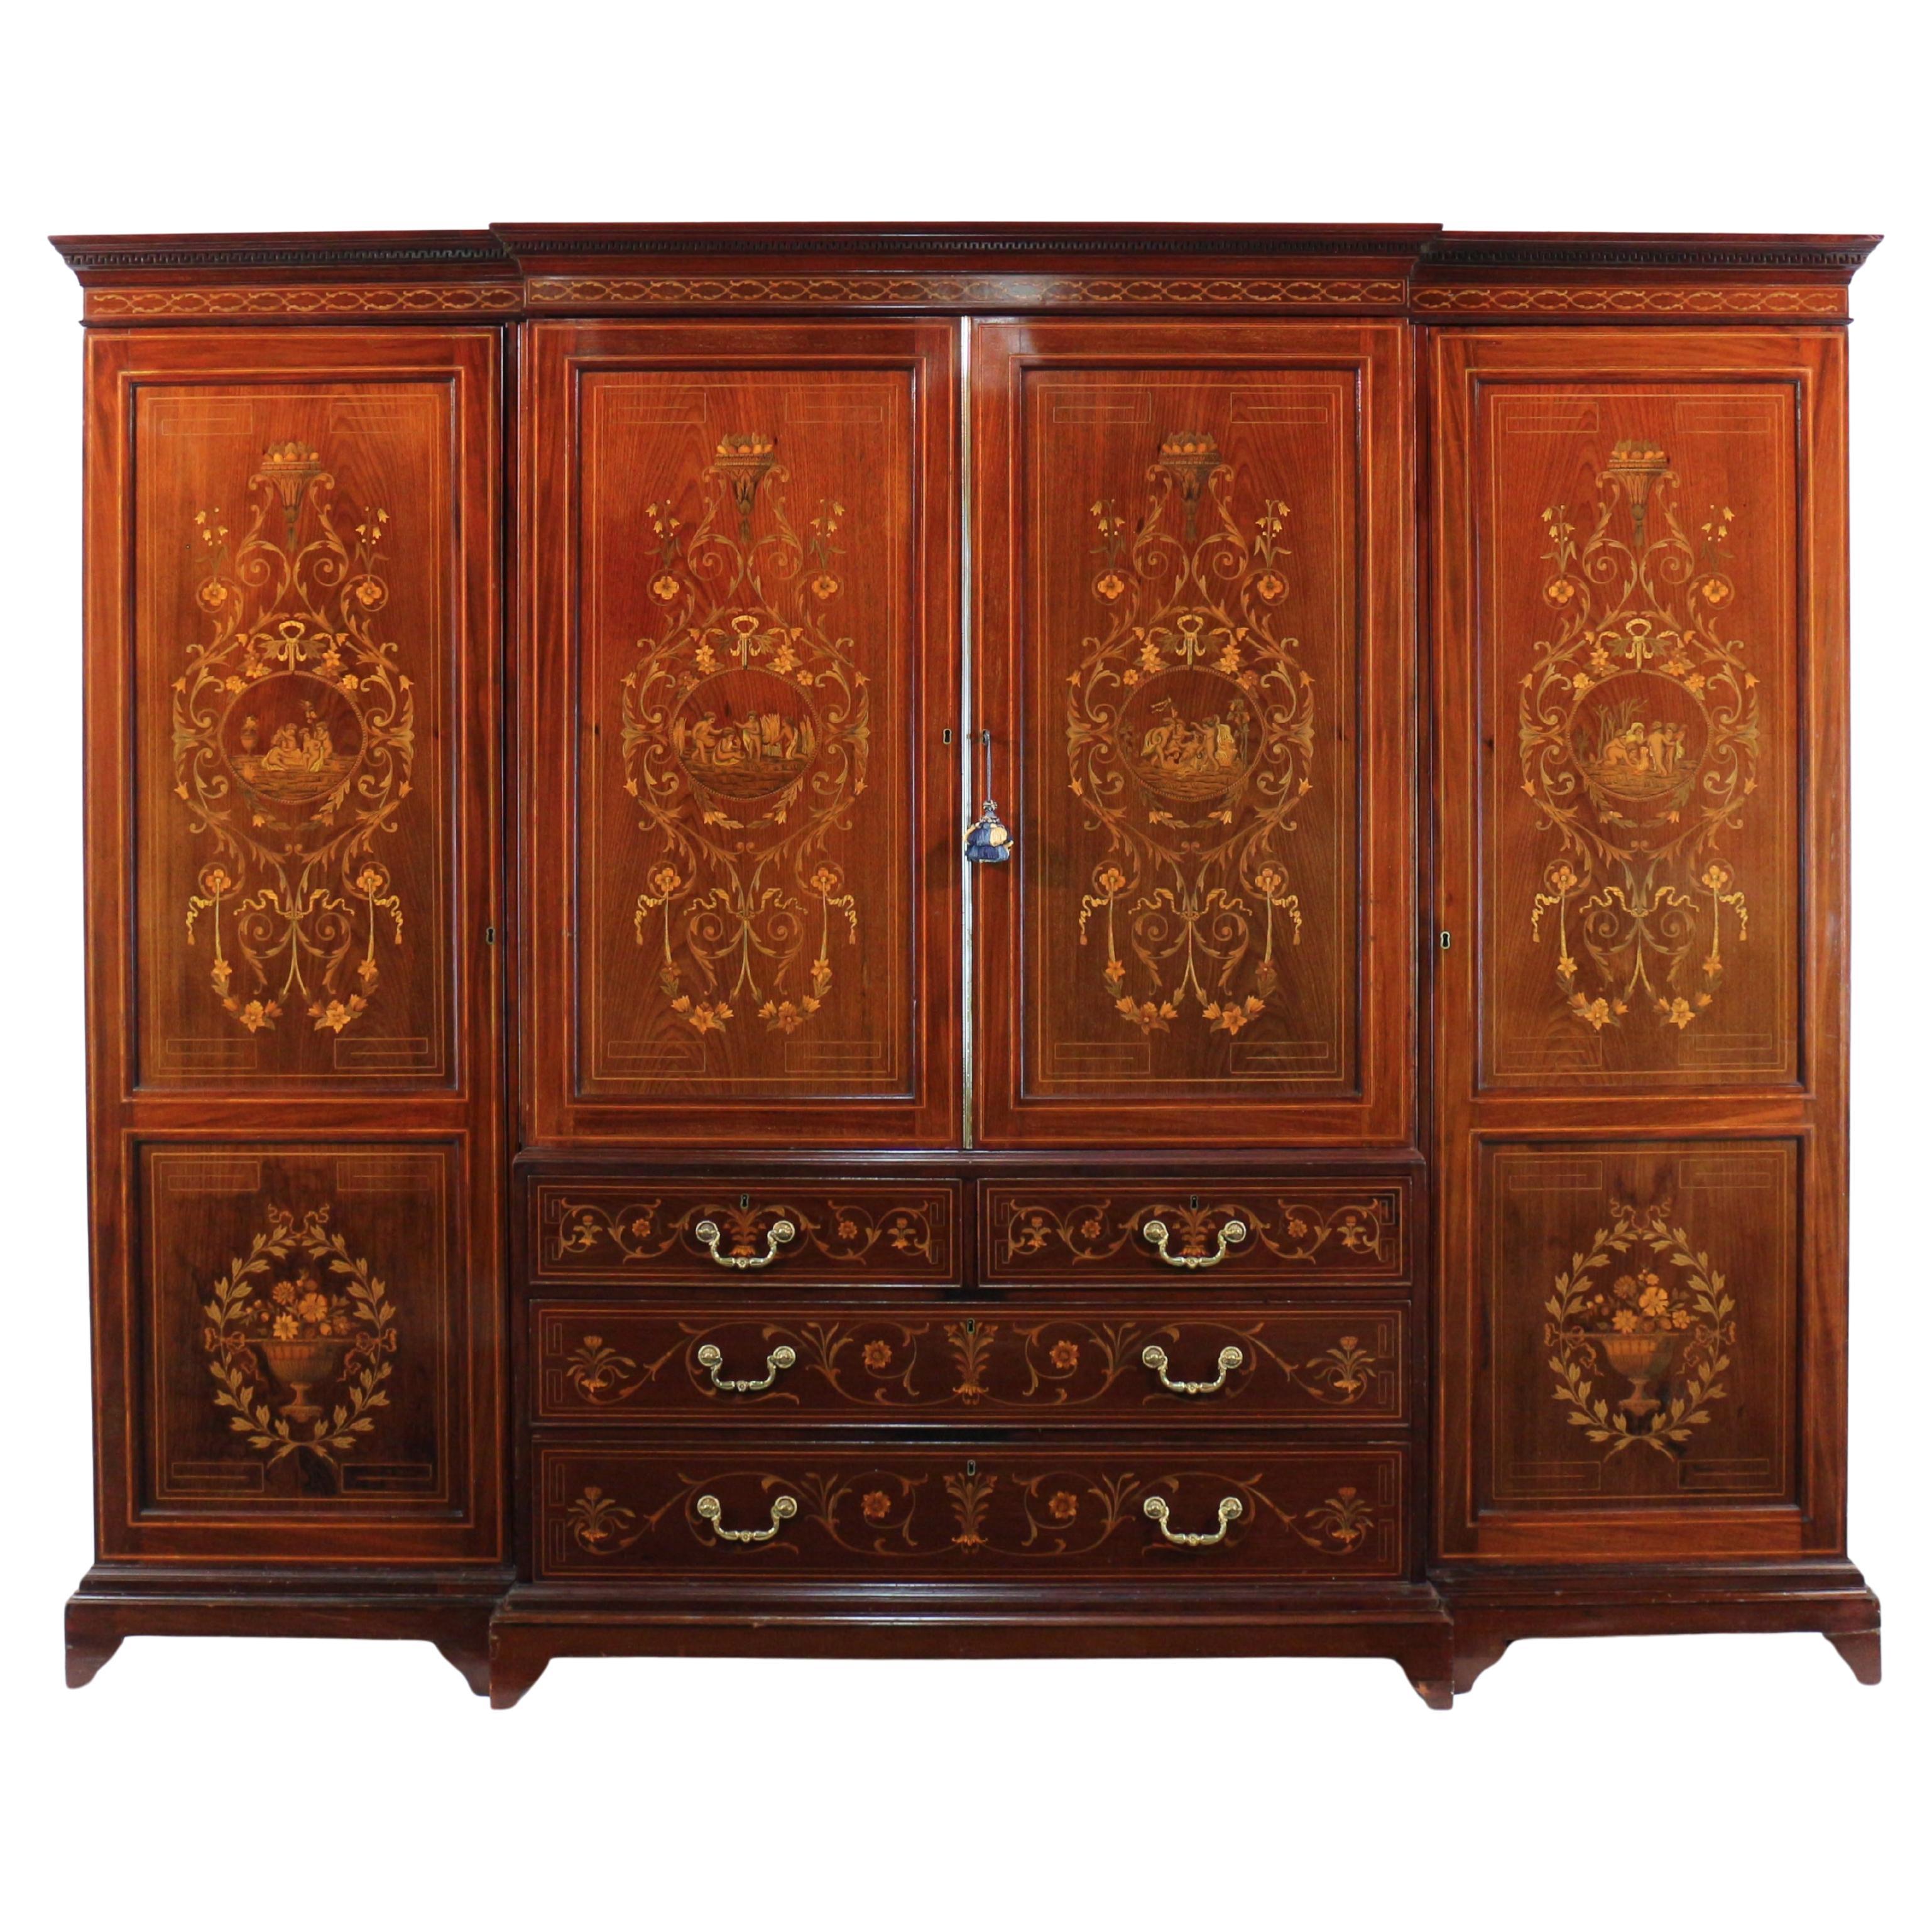 Antique English Victorian Mahogany & Marquetry Inlaid Fitted Wardrobe For Sale